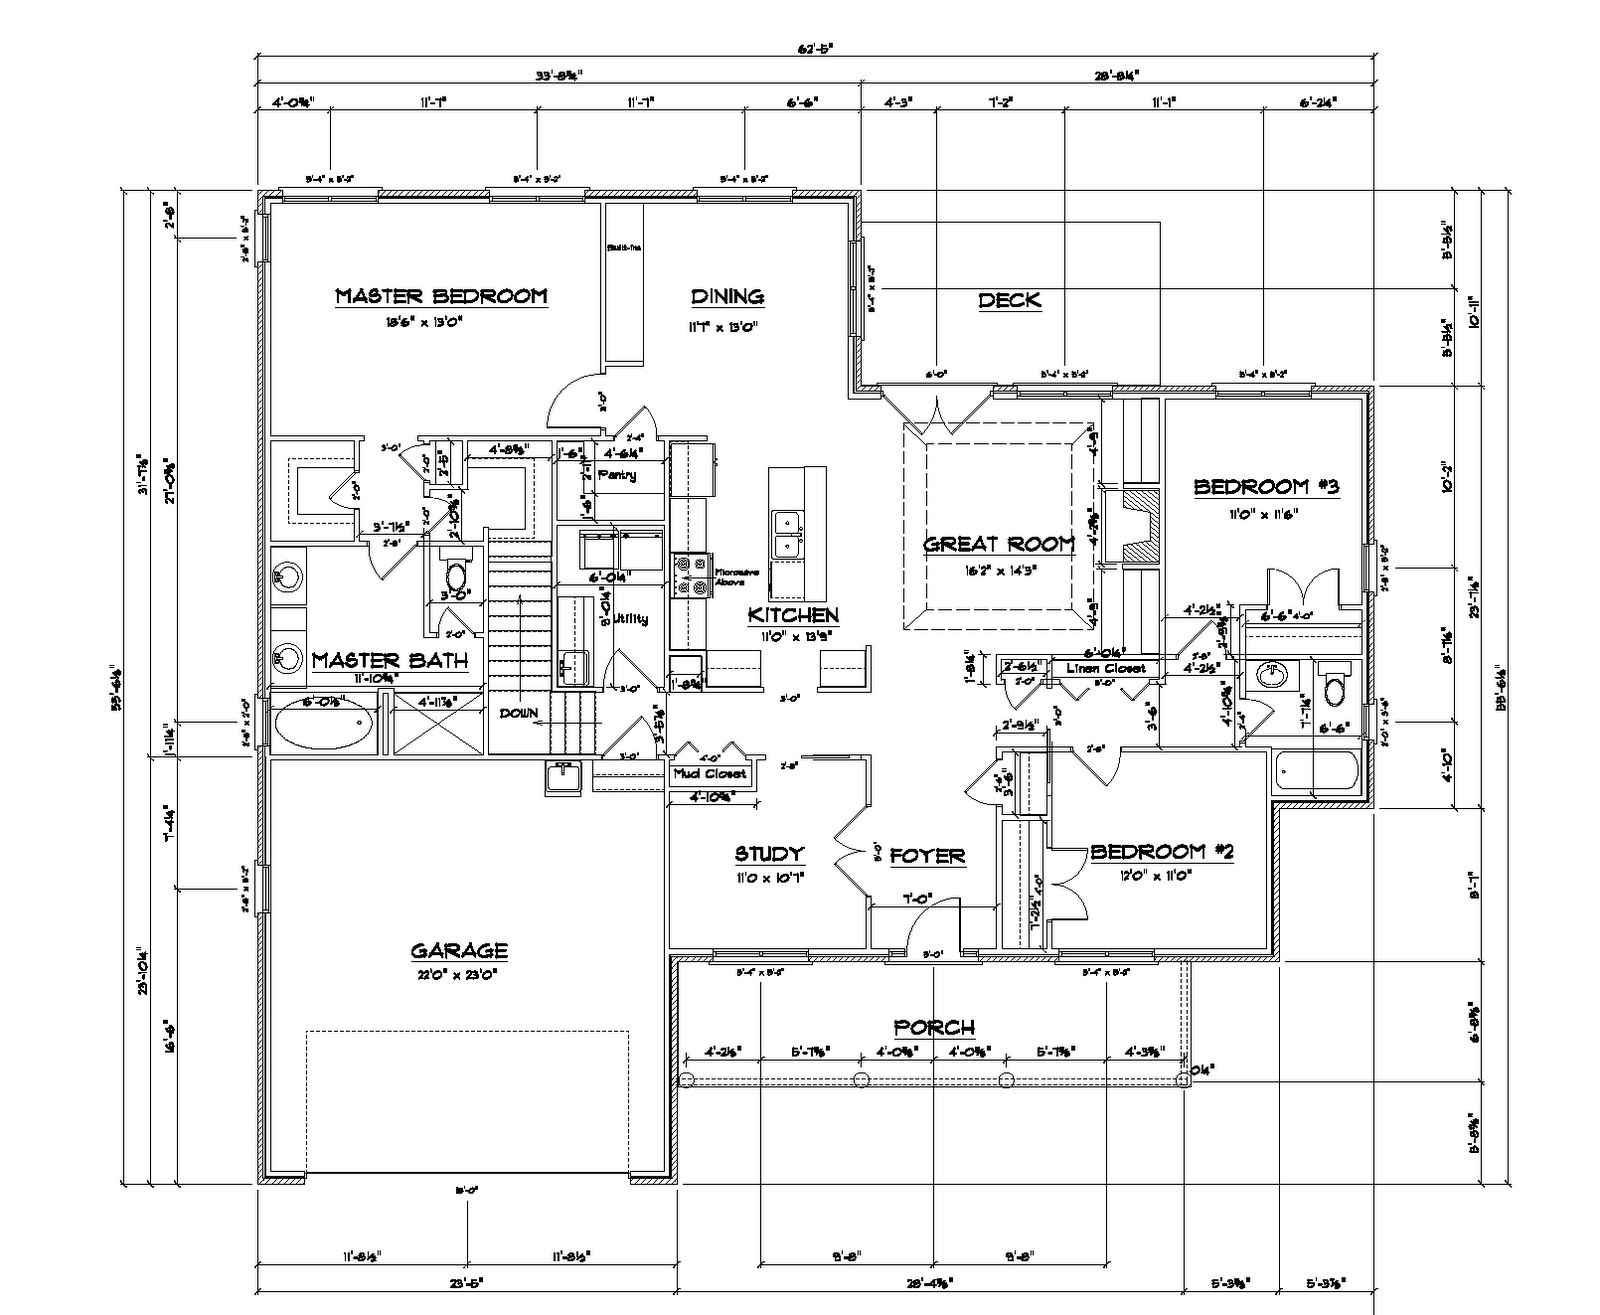 Download this House Plans Colection picture